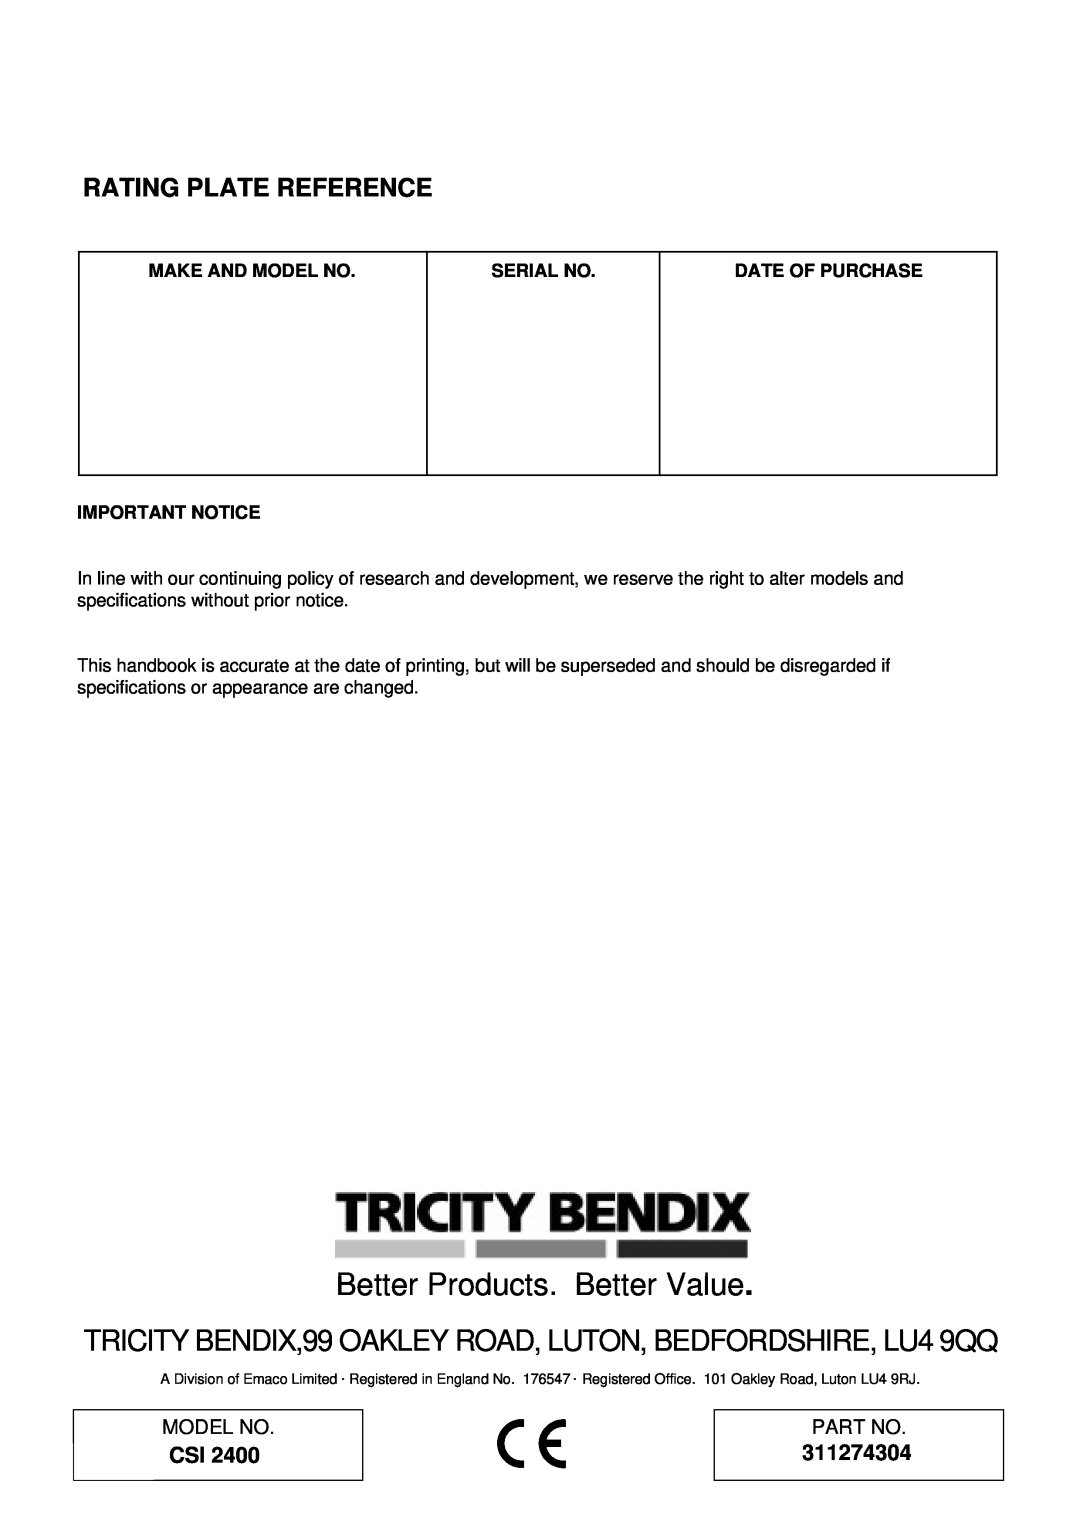 Tricity Bendix CSI 2400 Rating Plate Reference, 311274304, Better Products. Better Value, Make And Model No, Serial No 